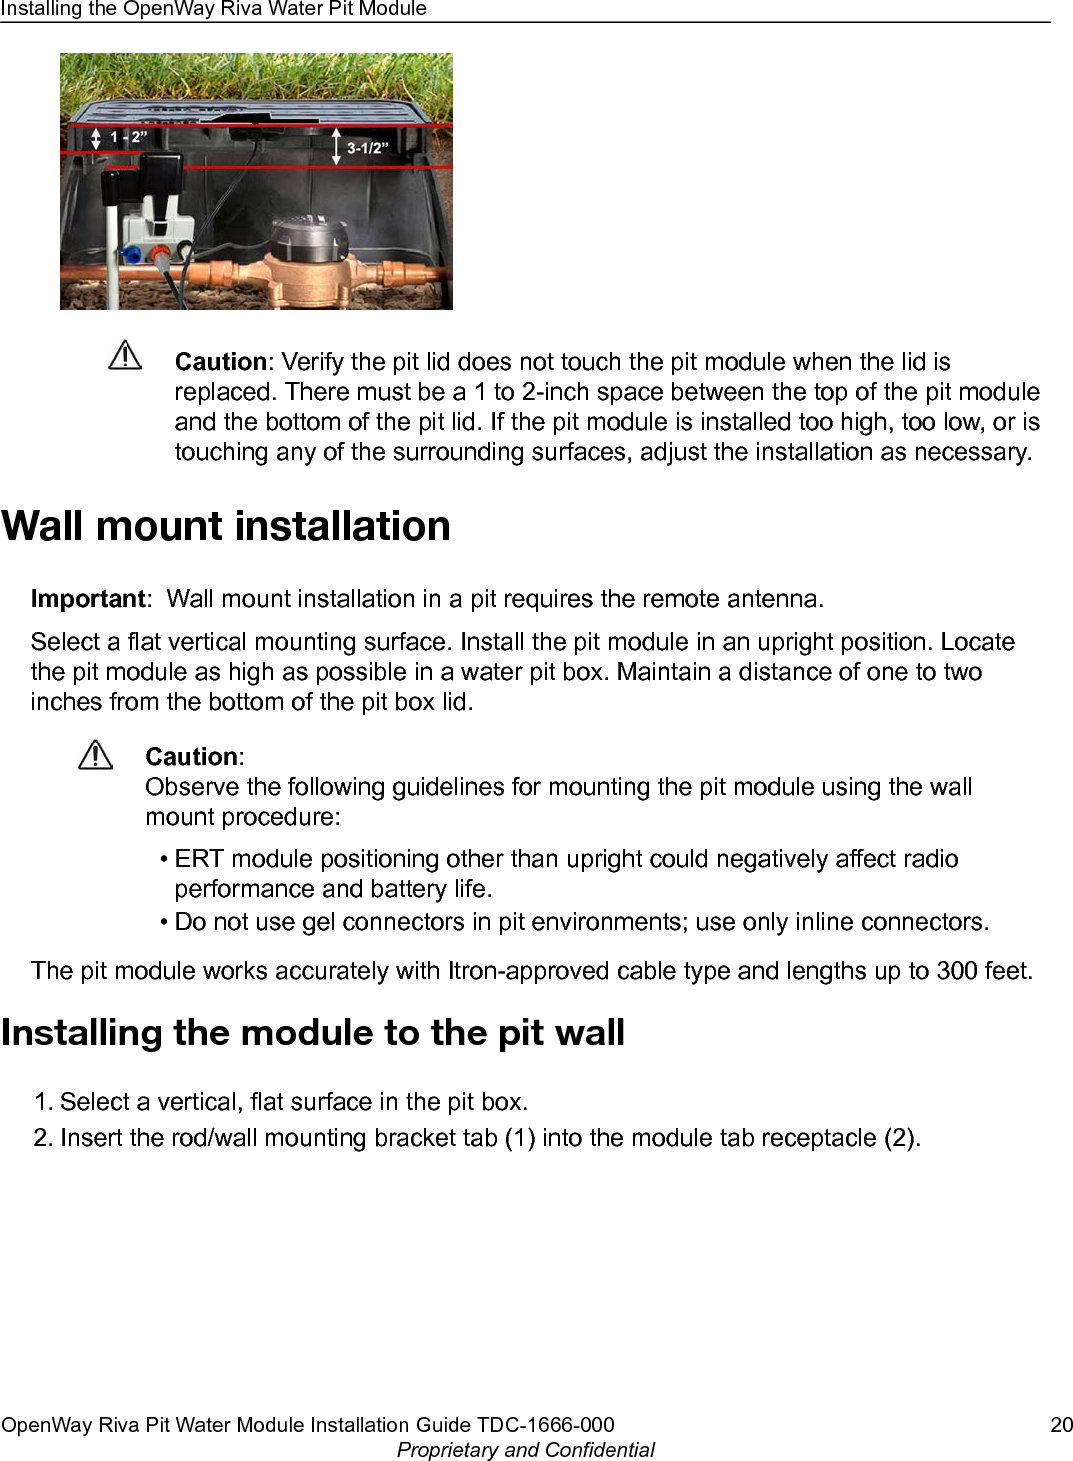 Caution: Verify the pit lid does not touch the pit module when the lid isreplaced. There must be a 1 to 2-inch space between the top of the pit moduleand the bottom of the pit lid. If the pit module is installed too high, too low, or istouching any of the surrounding surfaces, adjust the installation as necessary.Wall mount installationImportant:  Wall mount installation in a pit requires the remote antenna.Select a flat vertical mounting surface. Install the pit module in an upright position. Locatethe pit module as high as possible in a water pit box. Maintain a distance of one to twoinches from the bottom of the pit box lid.Caution:Observe the following guidelines for mounting the pit module using the wallmount procedure:•ERT module positioning other than upright could negatively affect radioperformance and battery life.• Do not use gel connectors in pit environments; use only inline connectors.The pit module works accurately with Itron-approved cable type and lengths up to 300 feet.Installing the module to the pit wall1. Select a vertical, flat surface in the pit box.2. Insert the rod/wall mounting bracket tab (1) into the module tab receptacle (2).Installing the OpenWay Riva Water Pit ModuleOpenWay Riva Pit Water Module Installation Guide TDC-1666-000 20Proprietary and Confidential